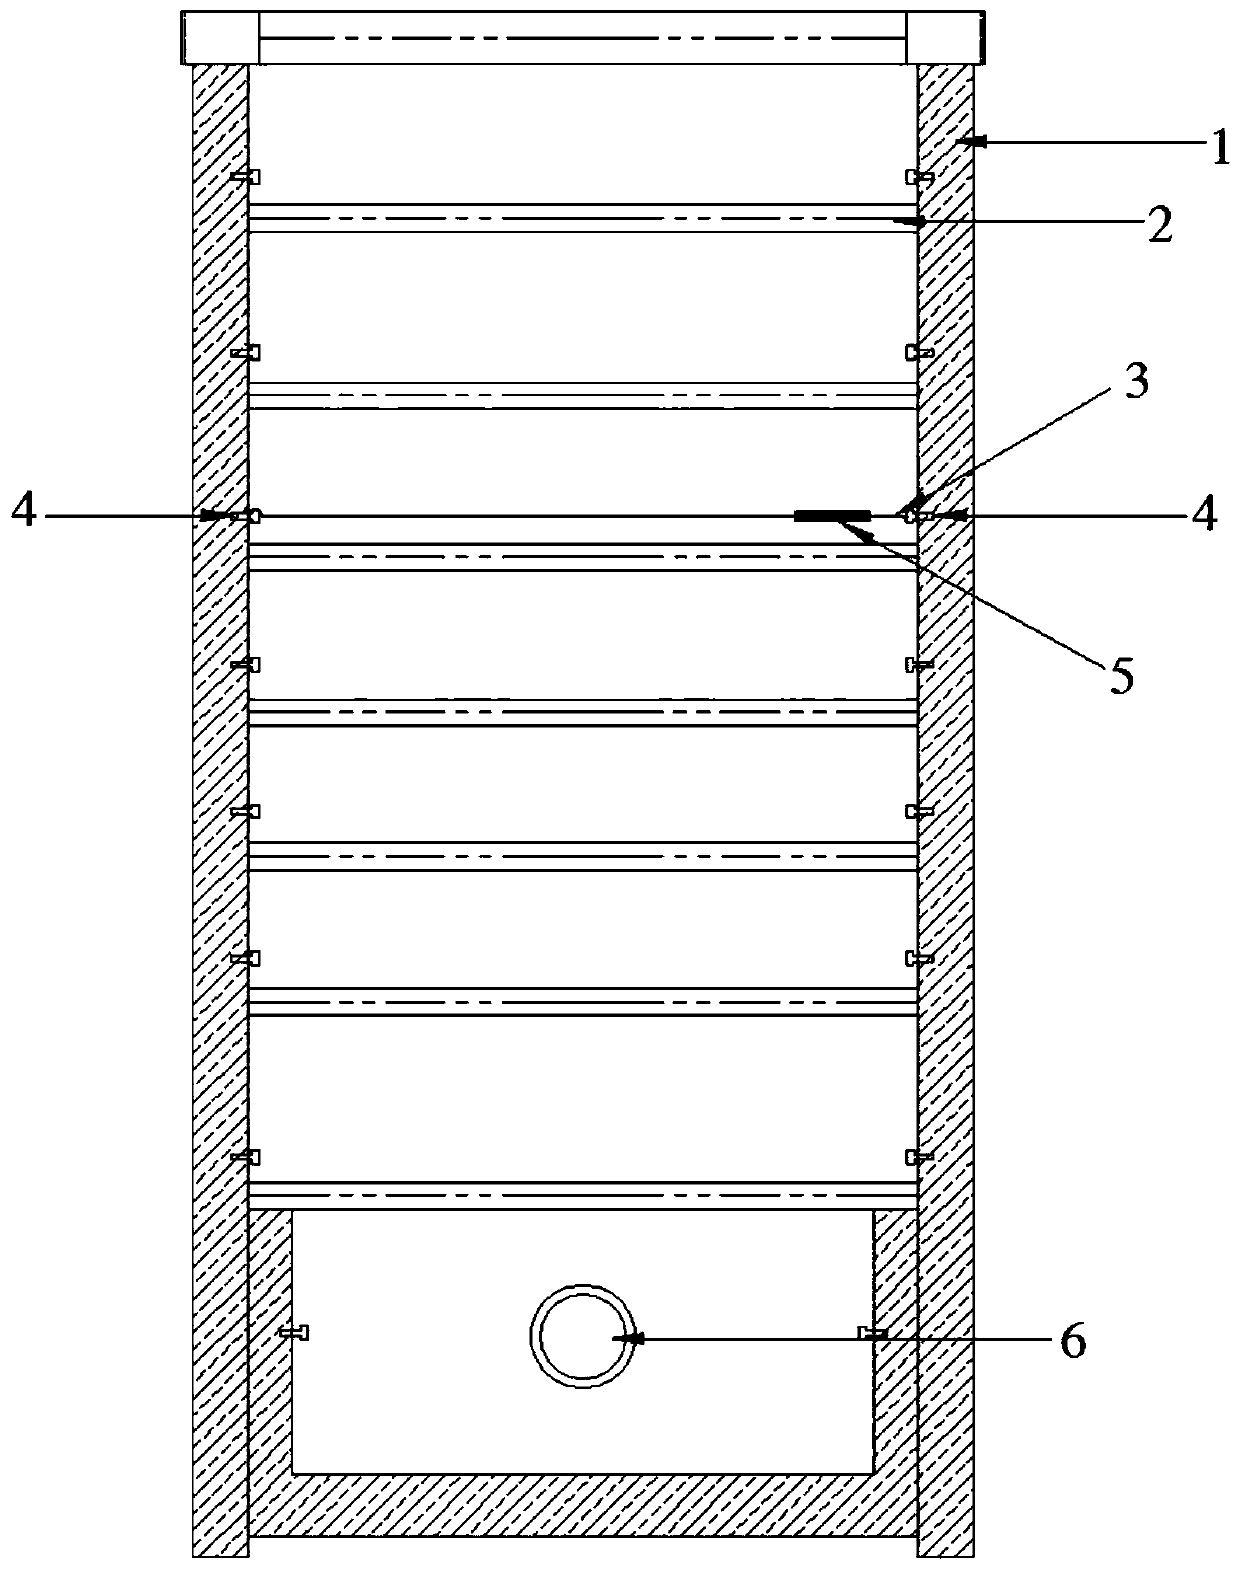 System and method for measuring horizontal deformation of pipe jacking working well